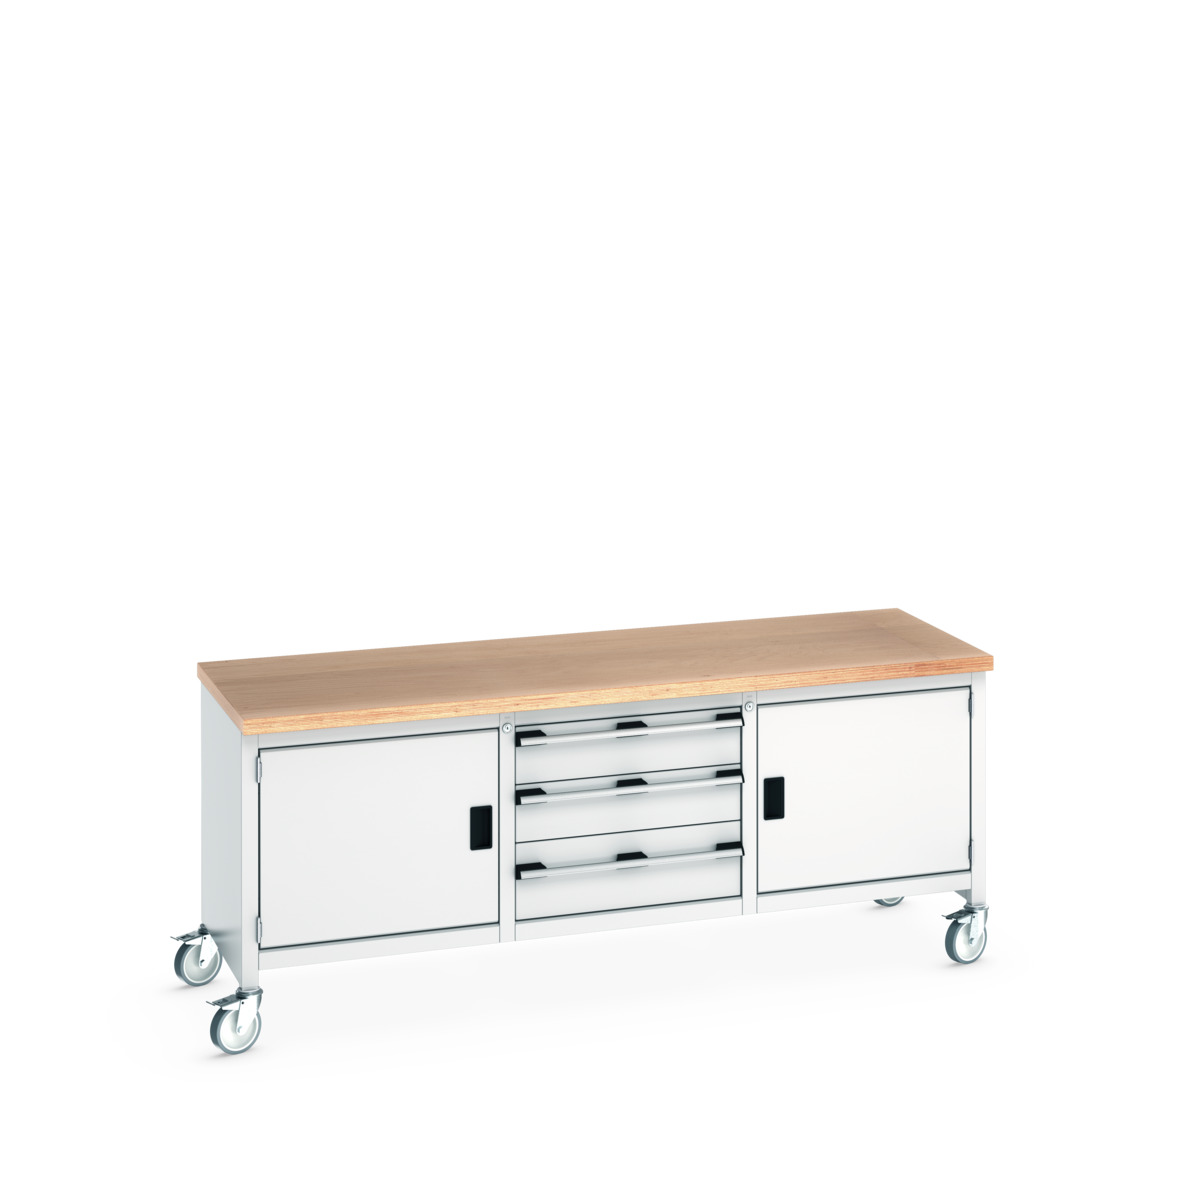 41002124.16V - cubio mobile storage bench (mpx)